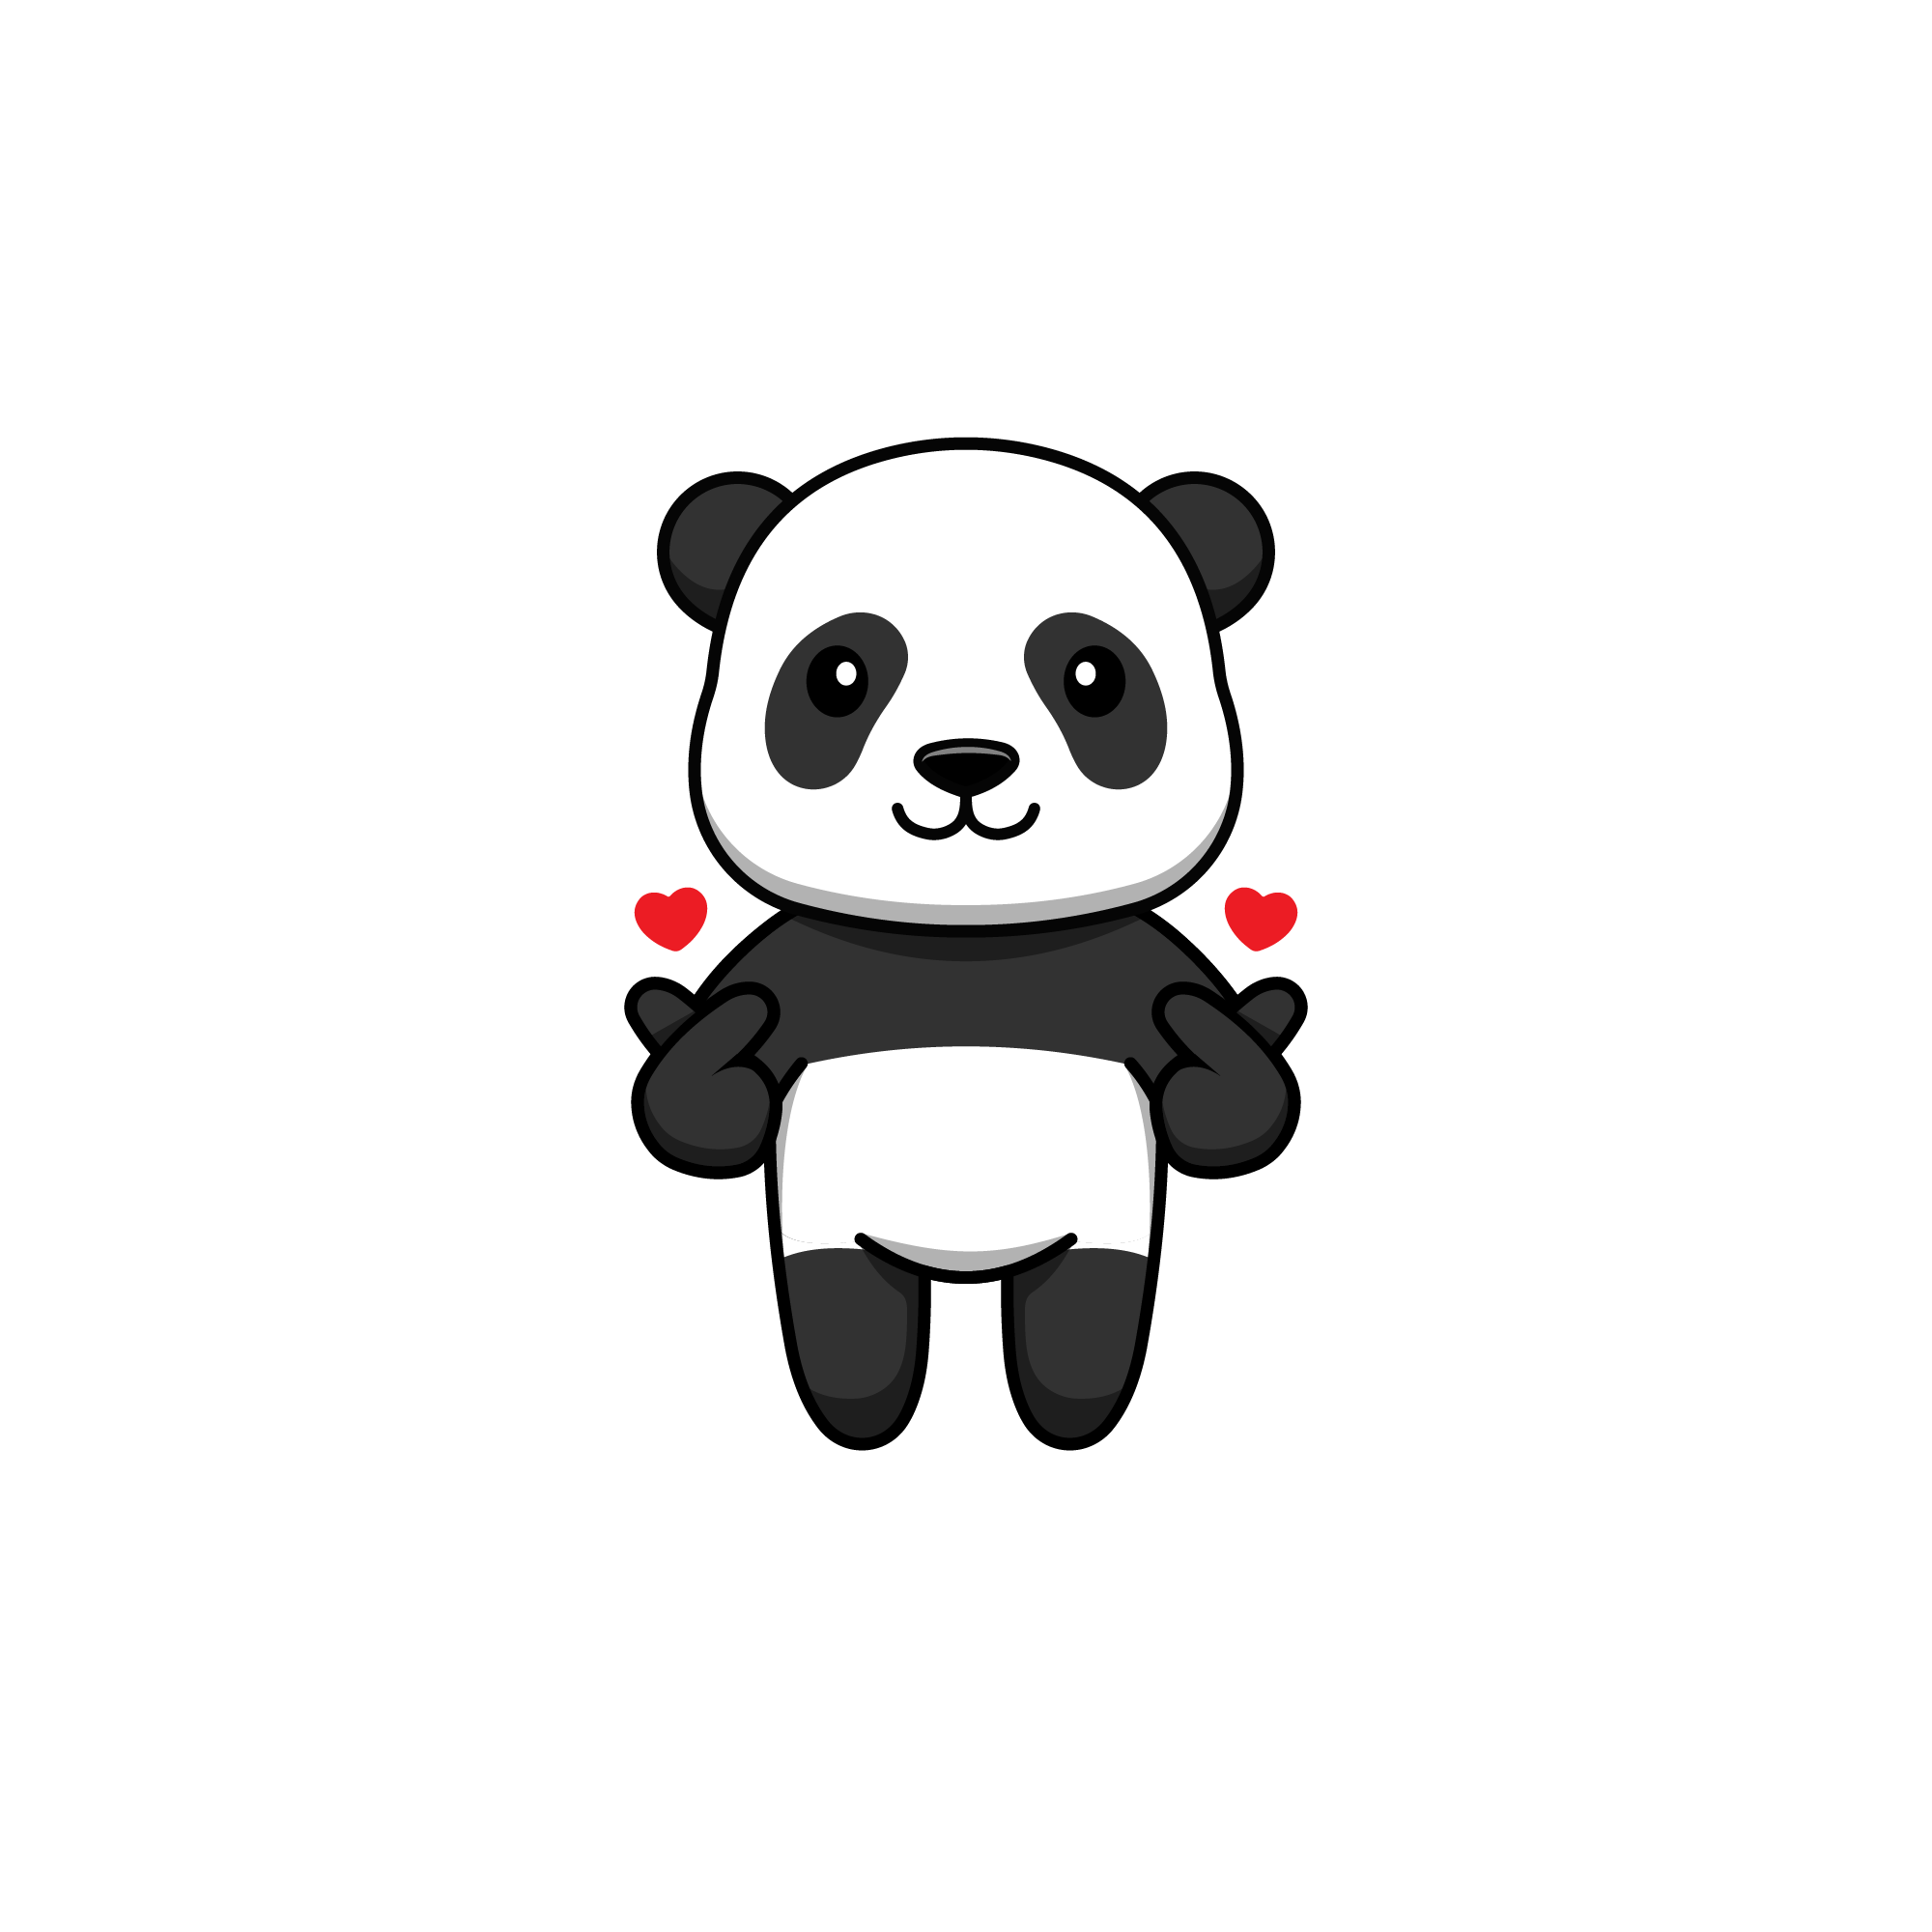 Panda with little hearts above the hands